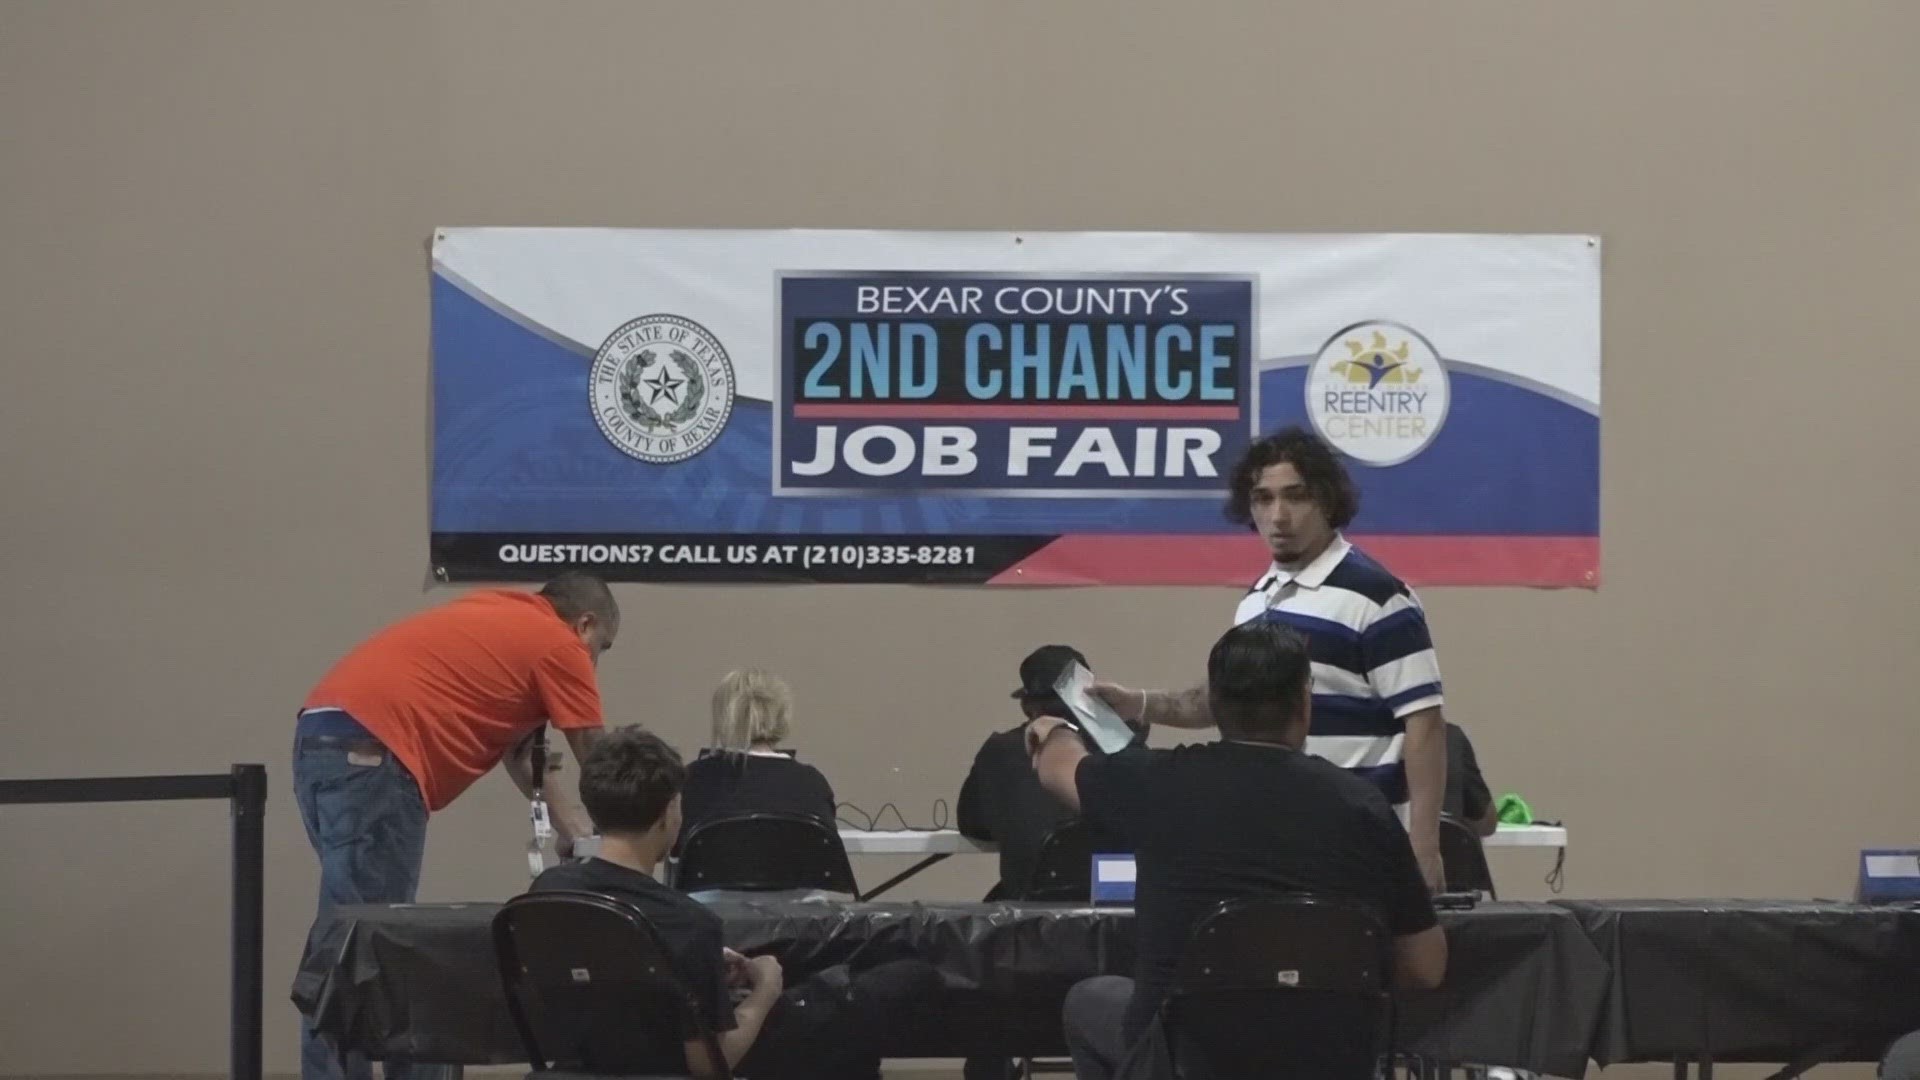 The "Second Chance Job Fair" gives those with a criminal record, and opportunity to start new.